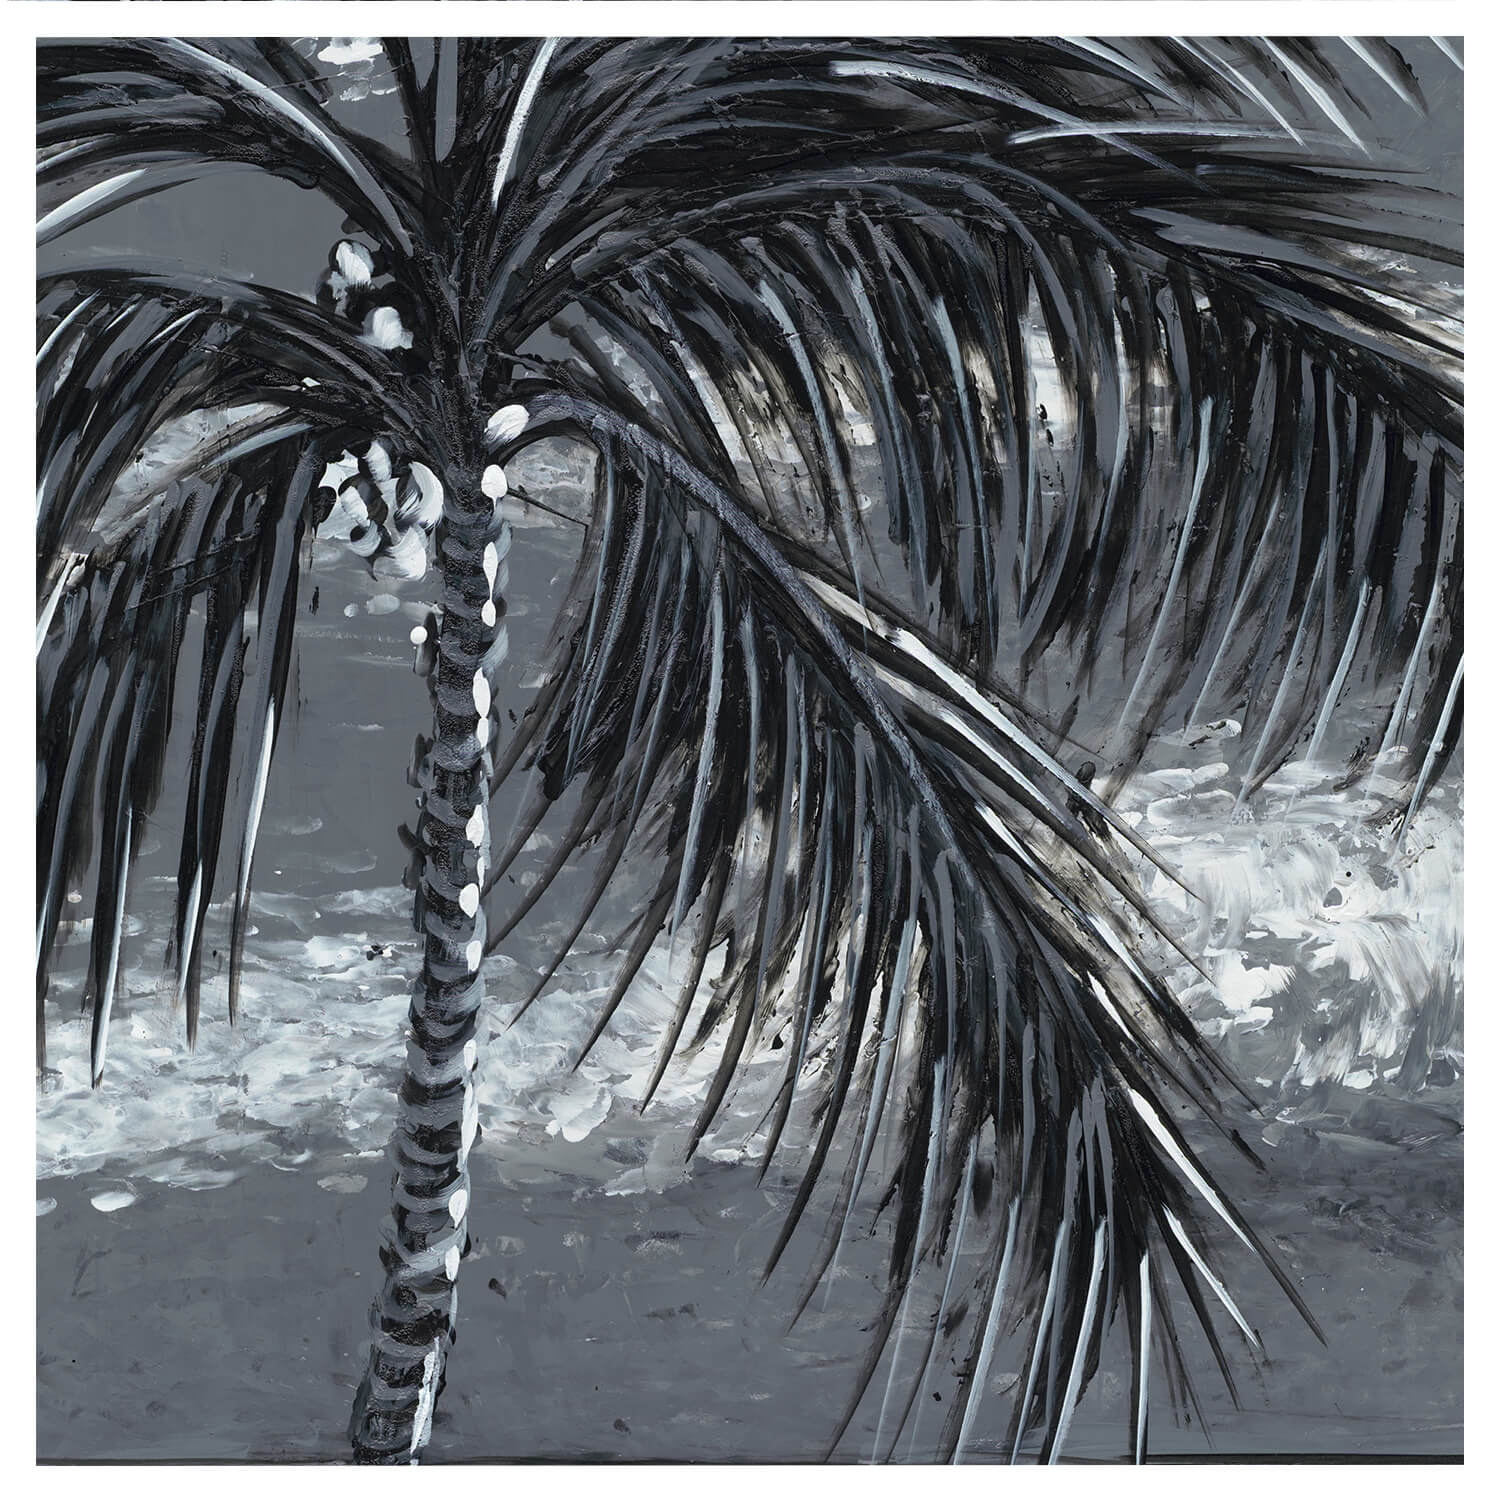 An illustration of a palm tree by hawaii artist Suzanne MacAdam 